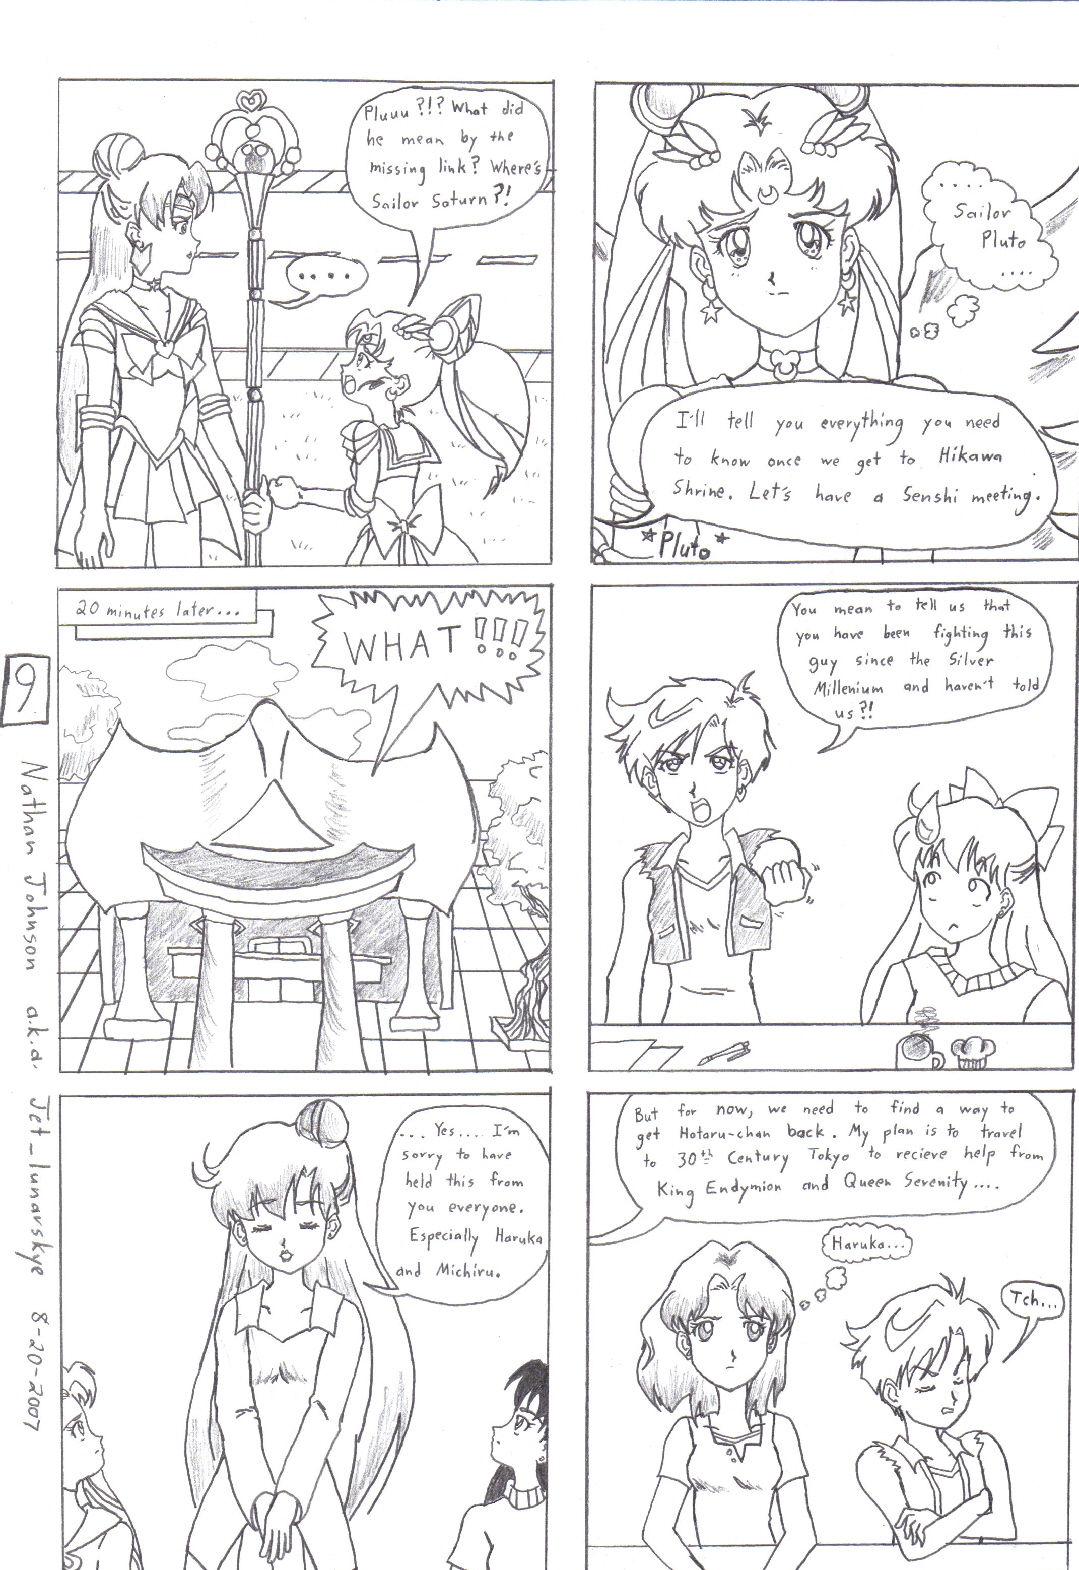 Sailor Moon: The Nightmare Soldier Page 9 by Jet_lunarskye